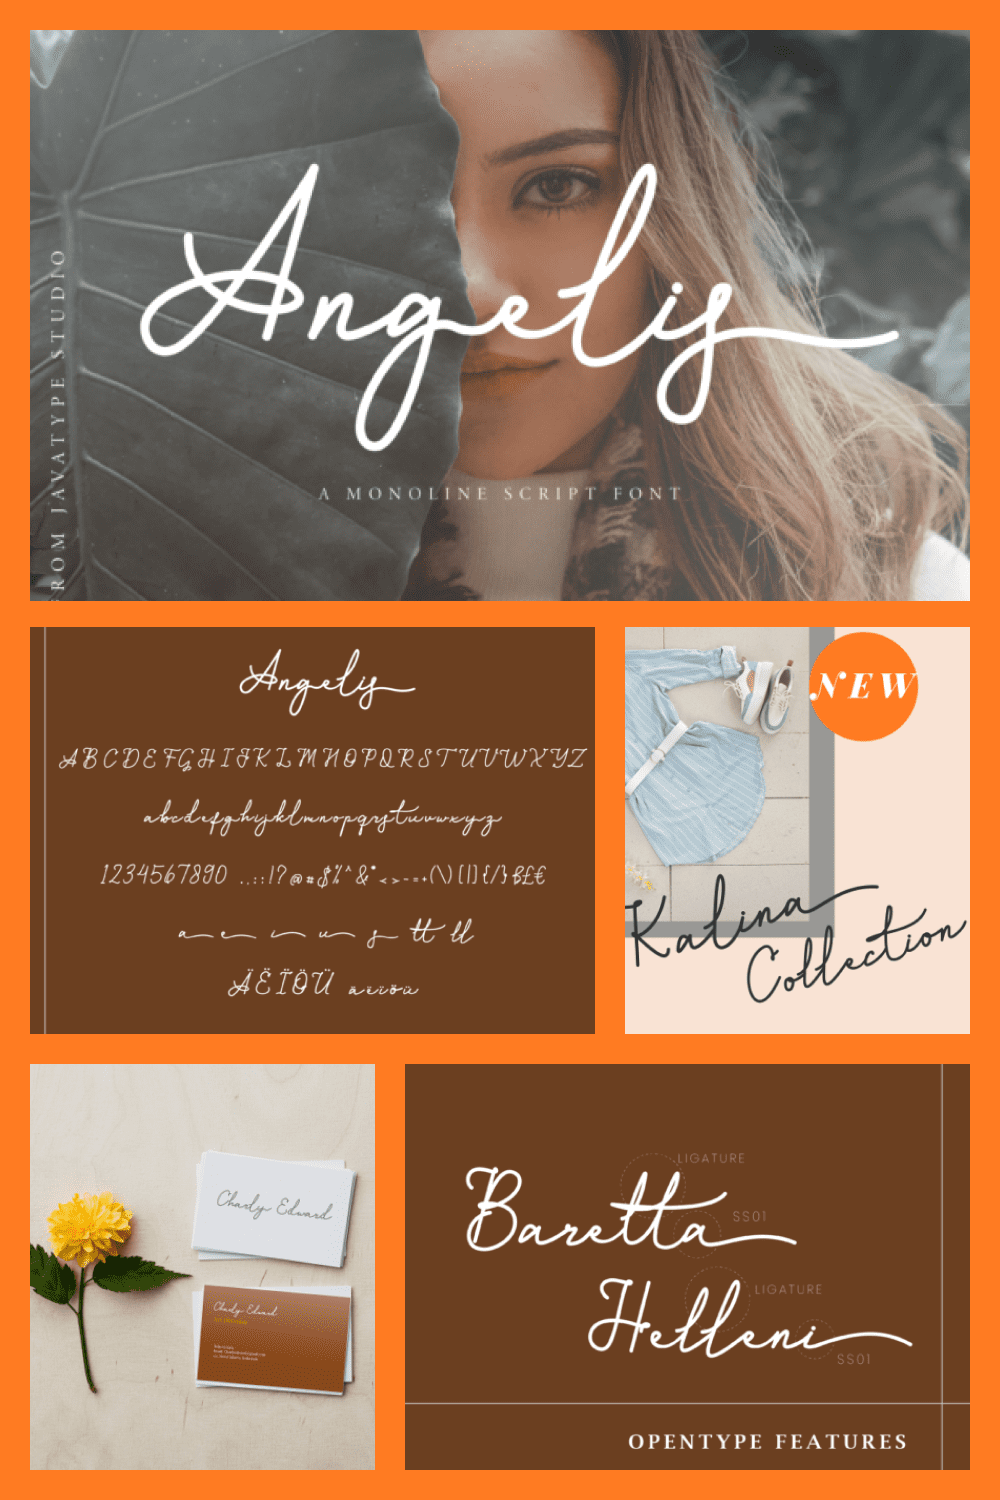 Angelis Script is a monoline script font which natural movement and elegant for signature style.